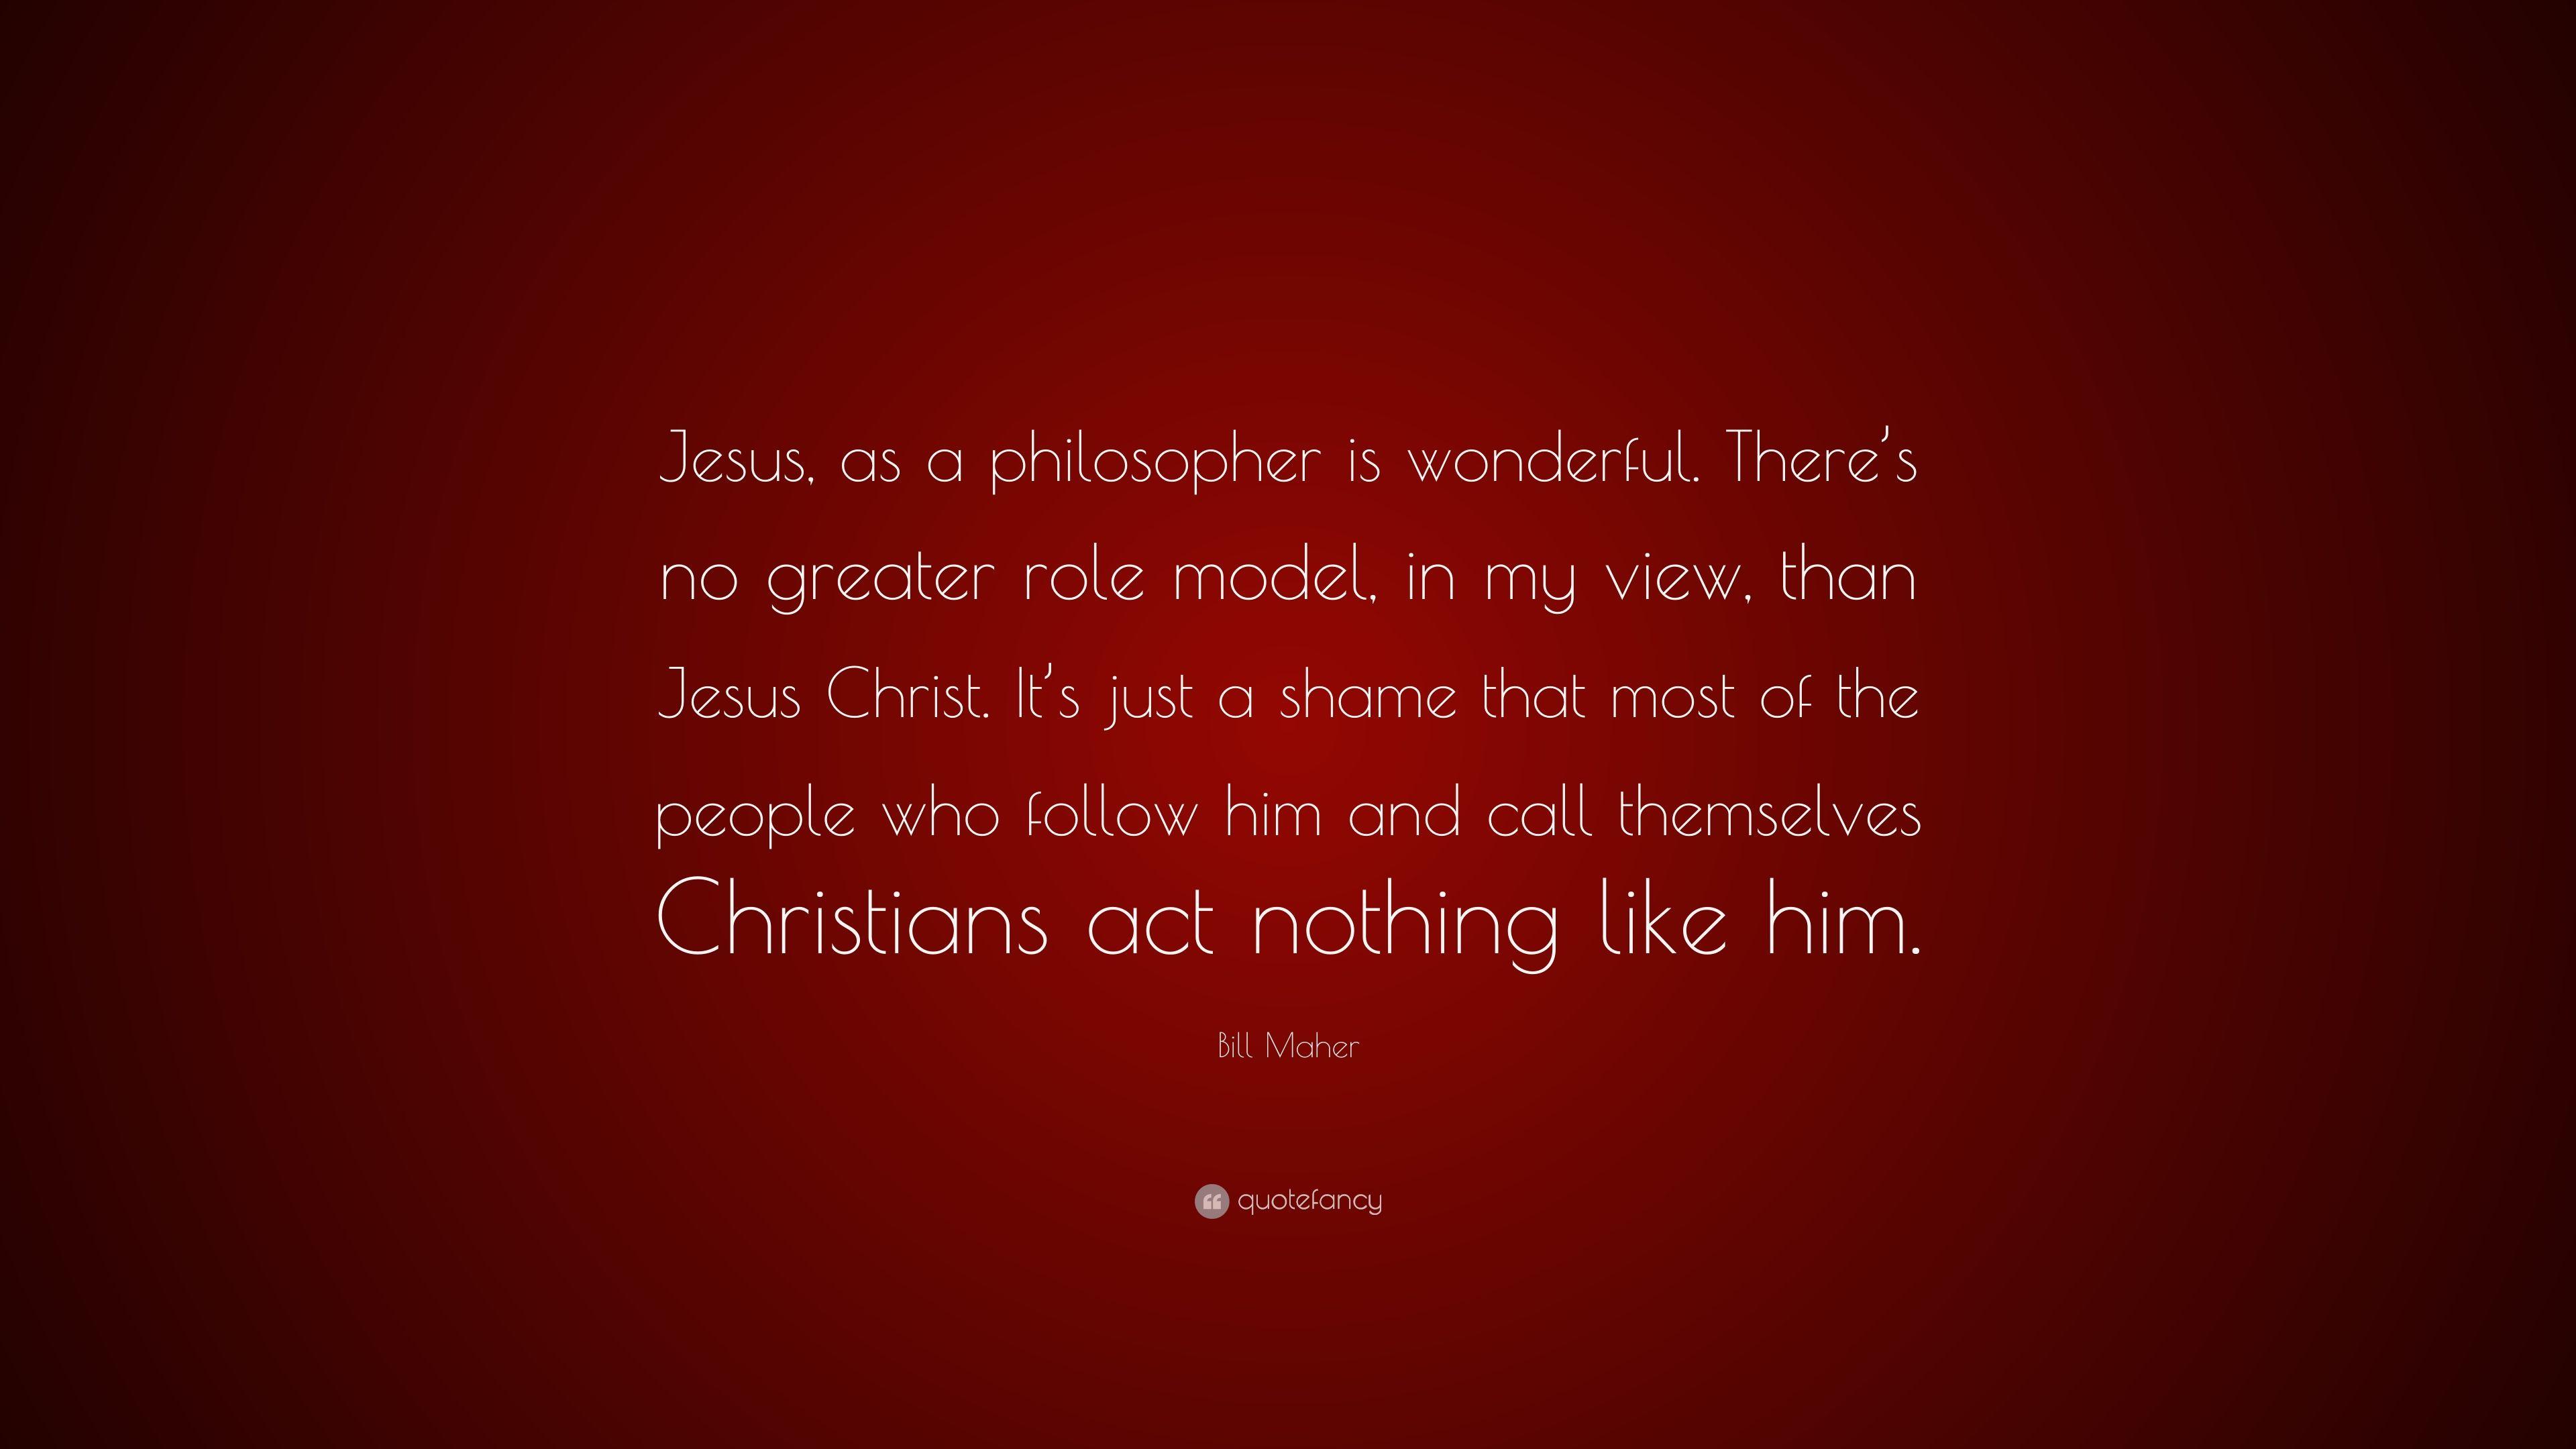 Bill Maher Quote: “Jesus, as a philosopher is wonderful. There's no